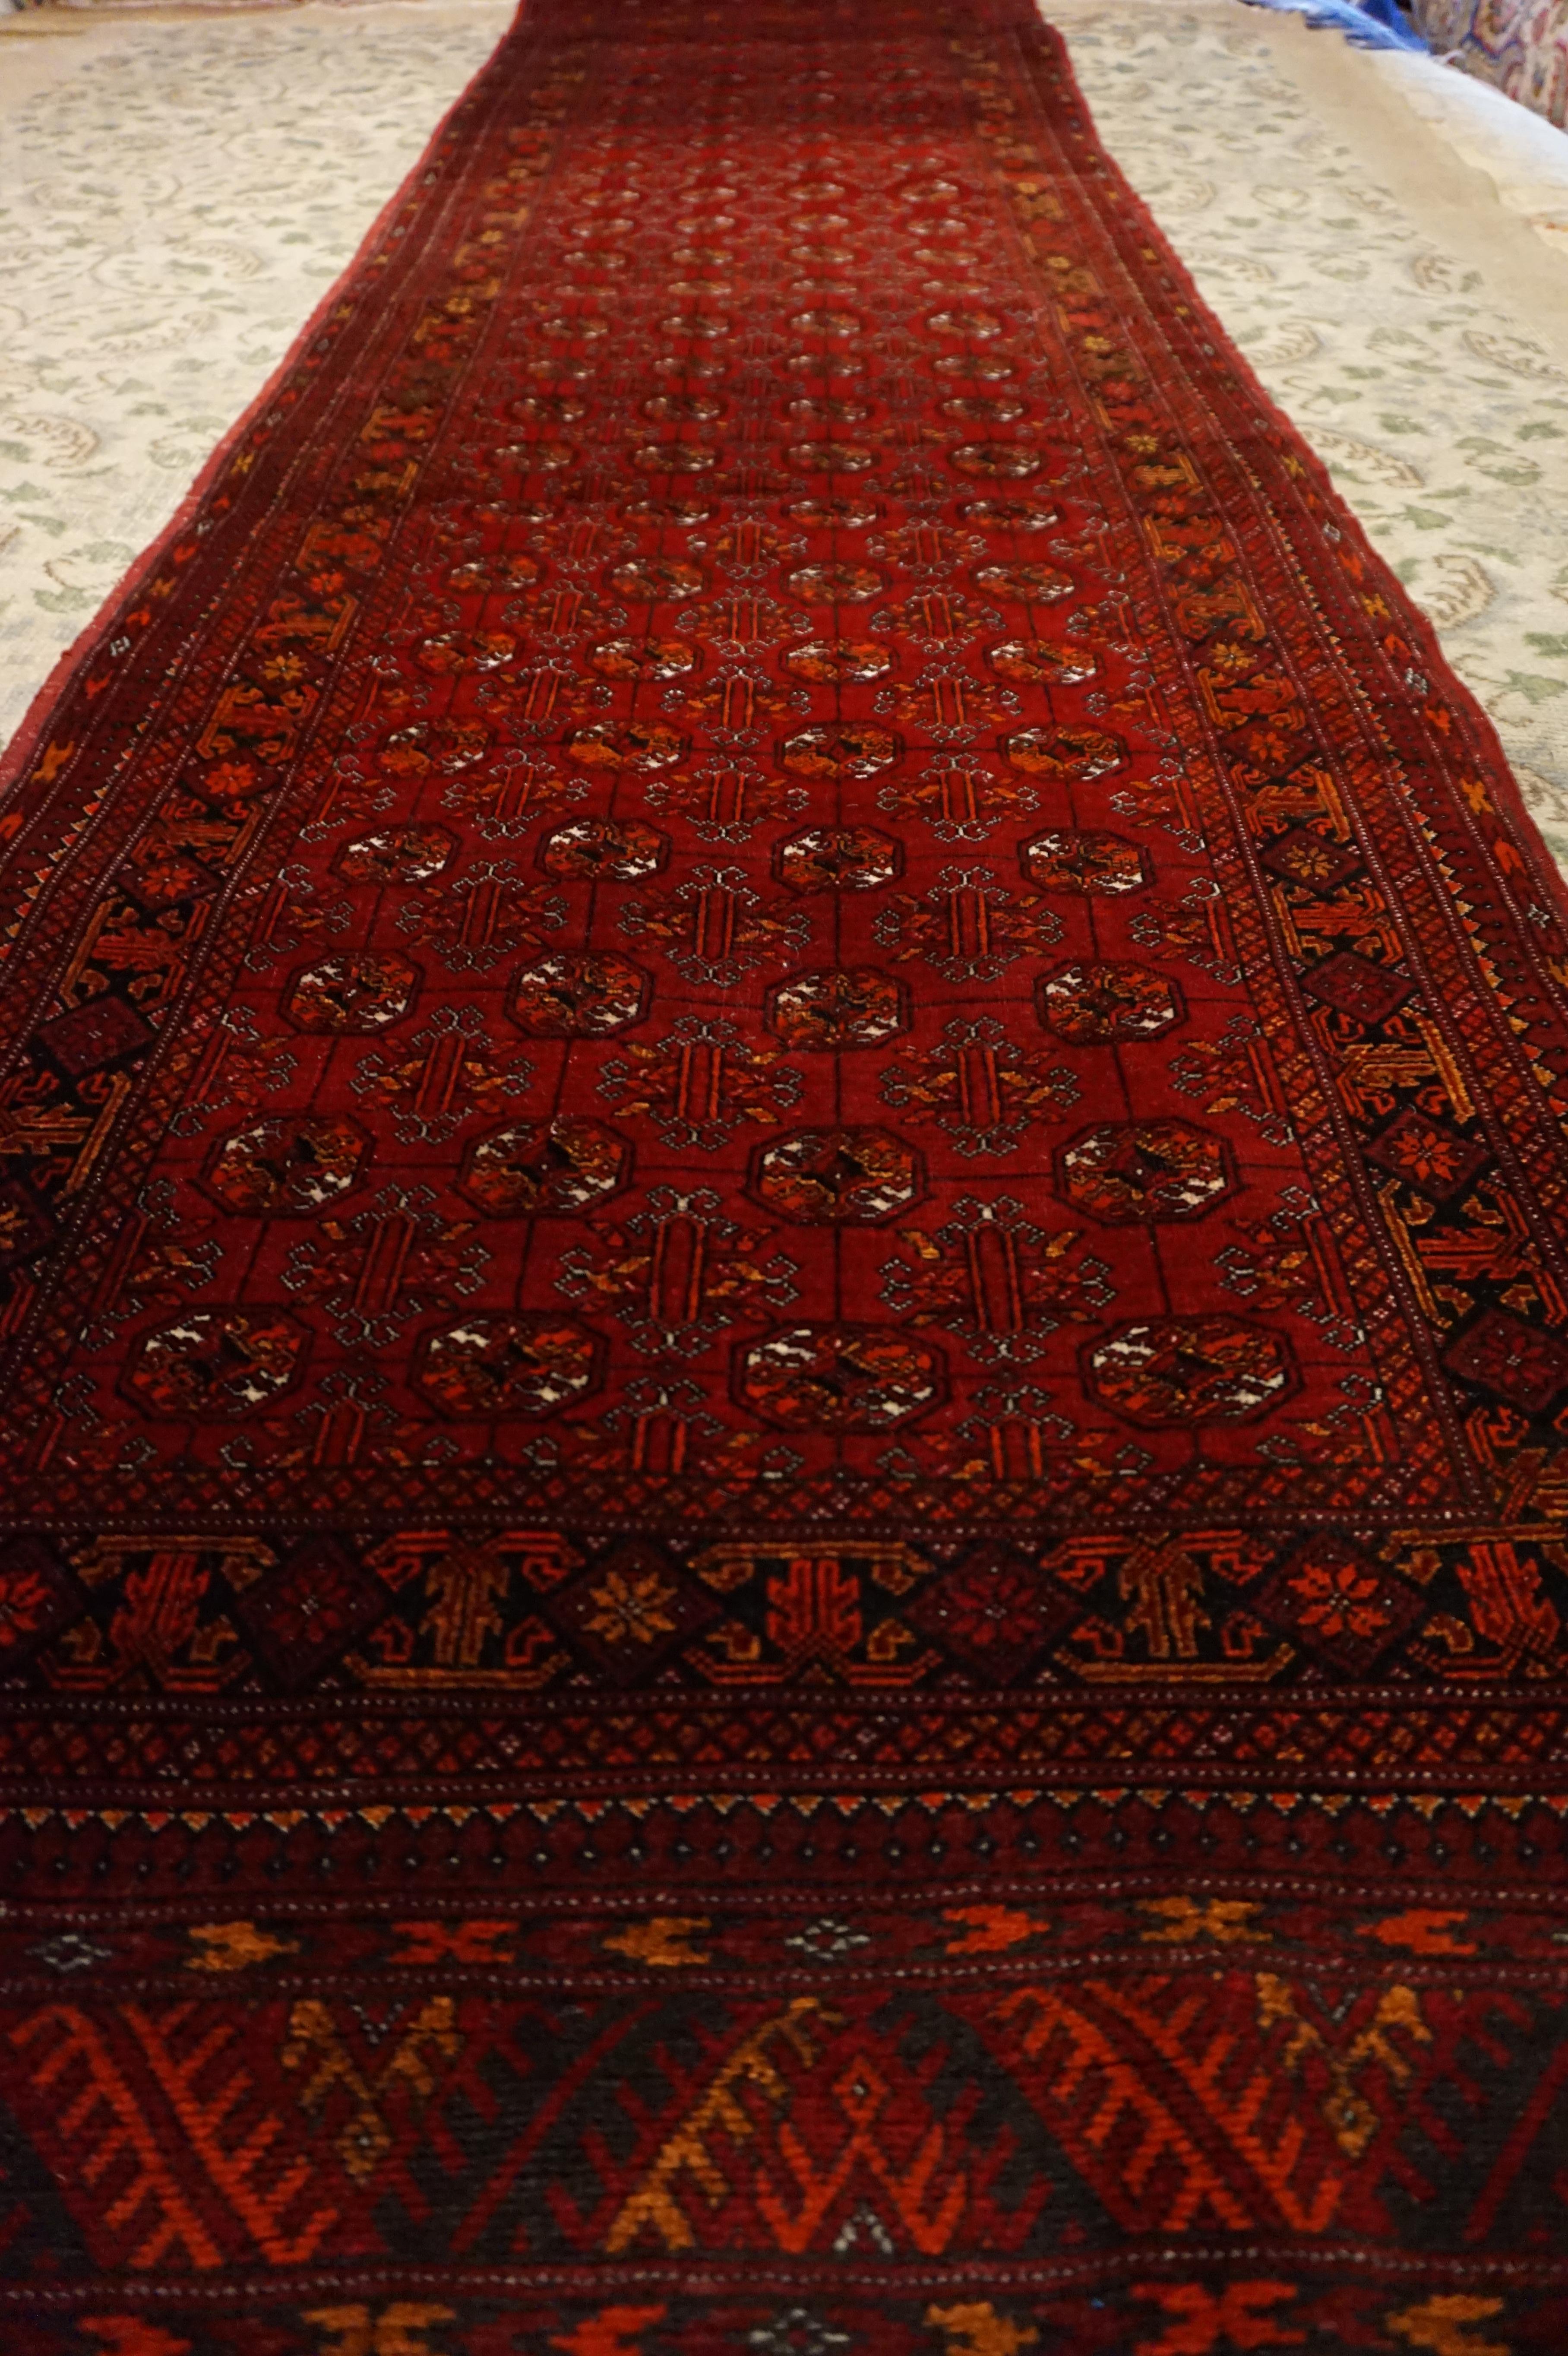 Antique Turkmen Bokhara runner in excellent condition. Densely knotted high quality wool runner with deep shades of crimson, orange and copper. Some variegation present. In overall good condition.